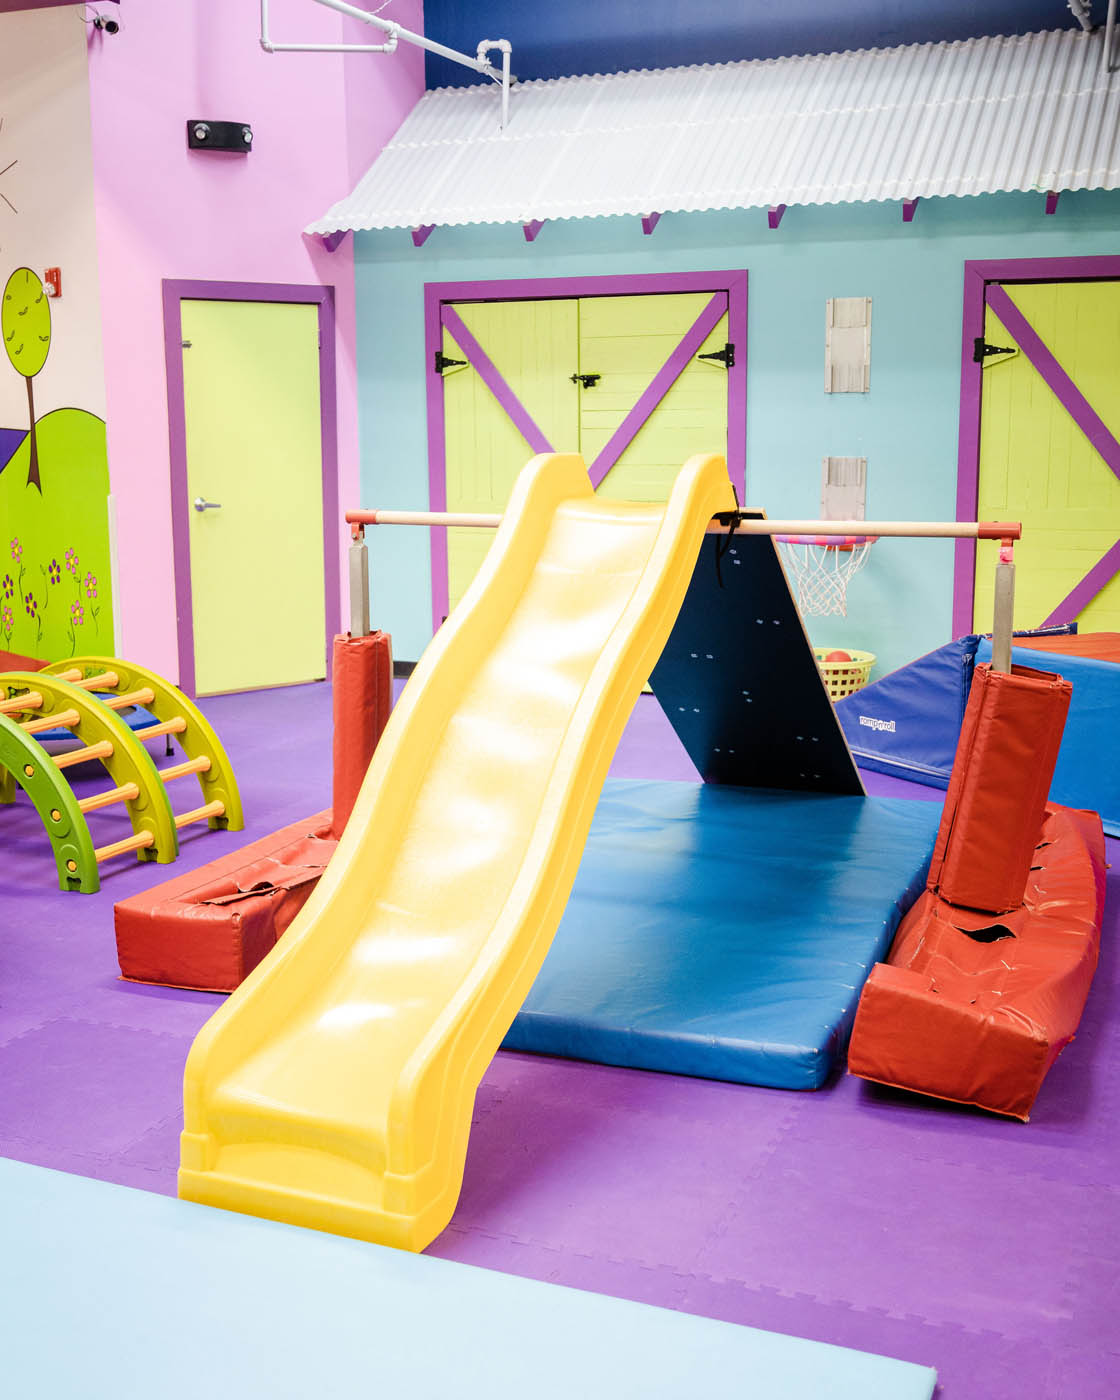 A Romp n' Roll Pittsburgh slide, indoor playgrounds in Pittsburgh, PA.